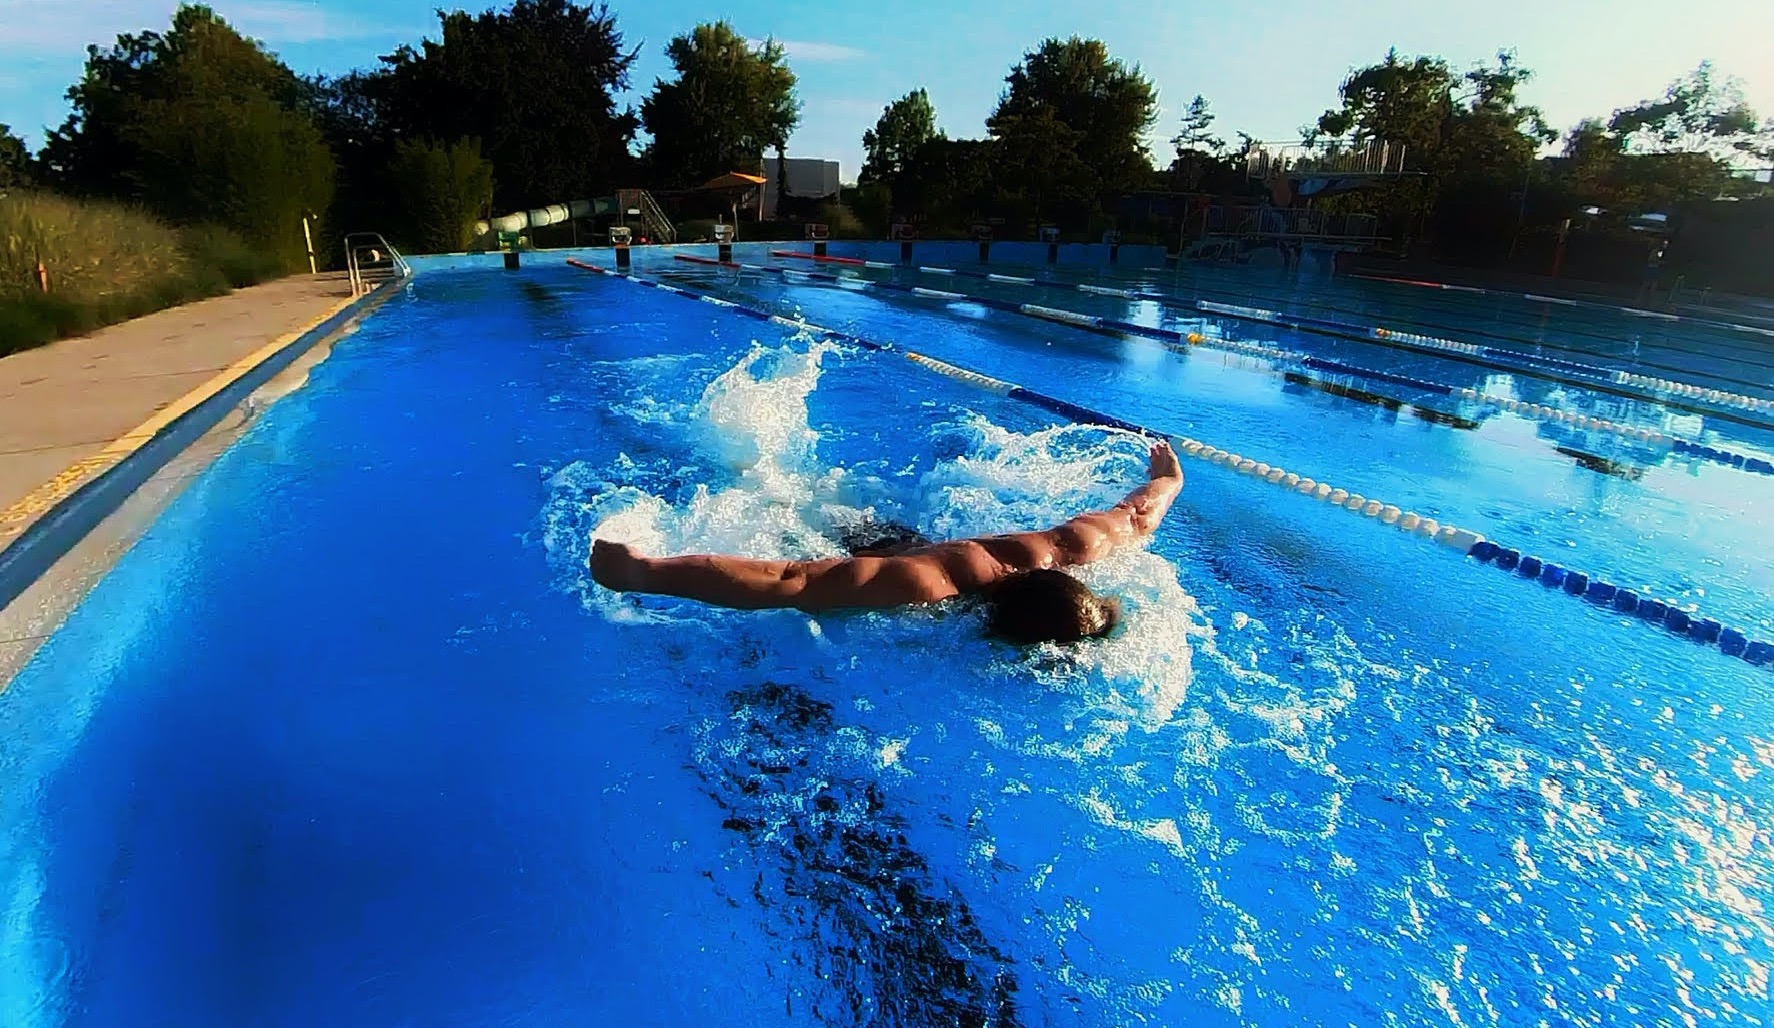 Pouring his energy into the pool, sports gave Markus Marthaler a constructive outlet to channel his ADHD.